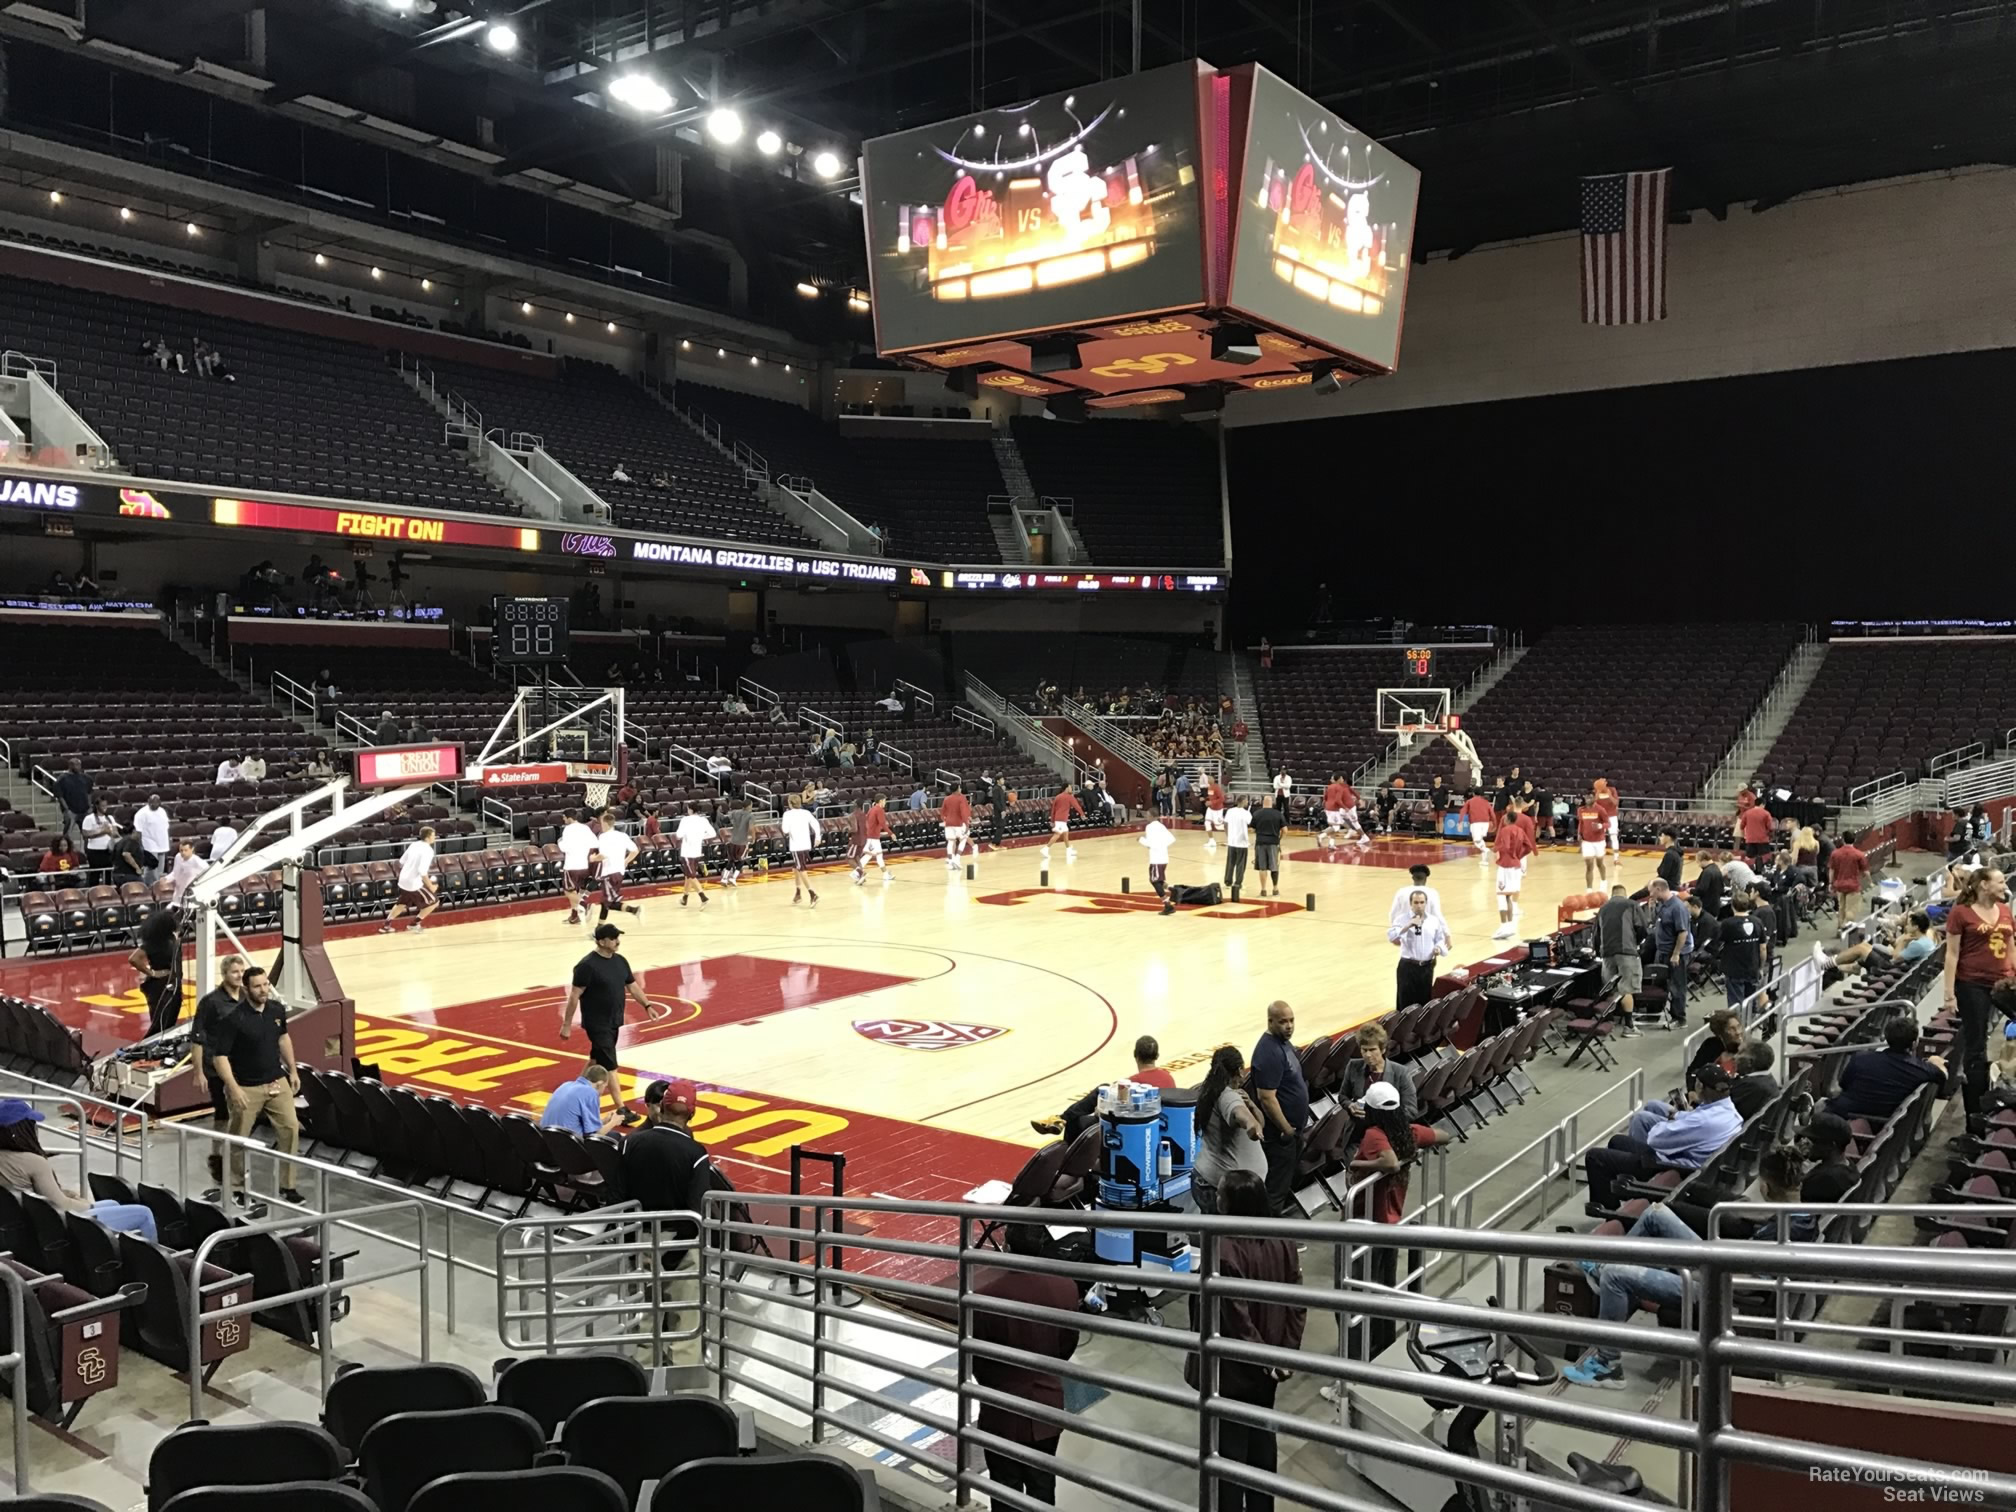 Section 112 at Galen Center